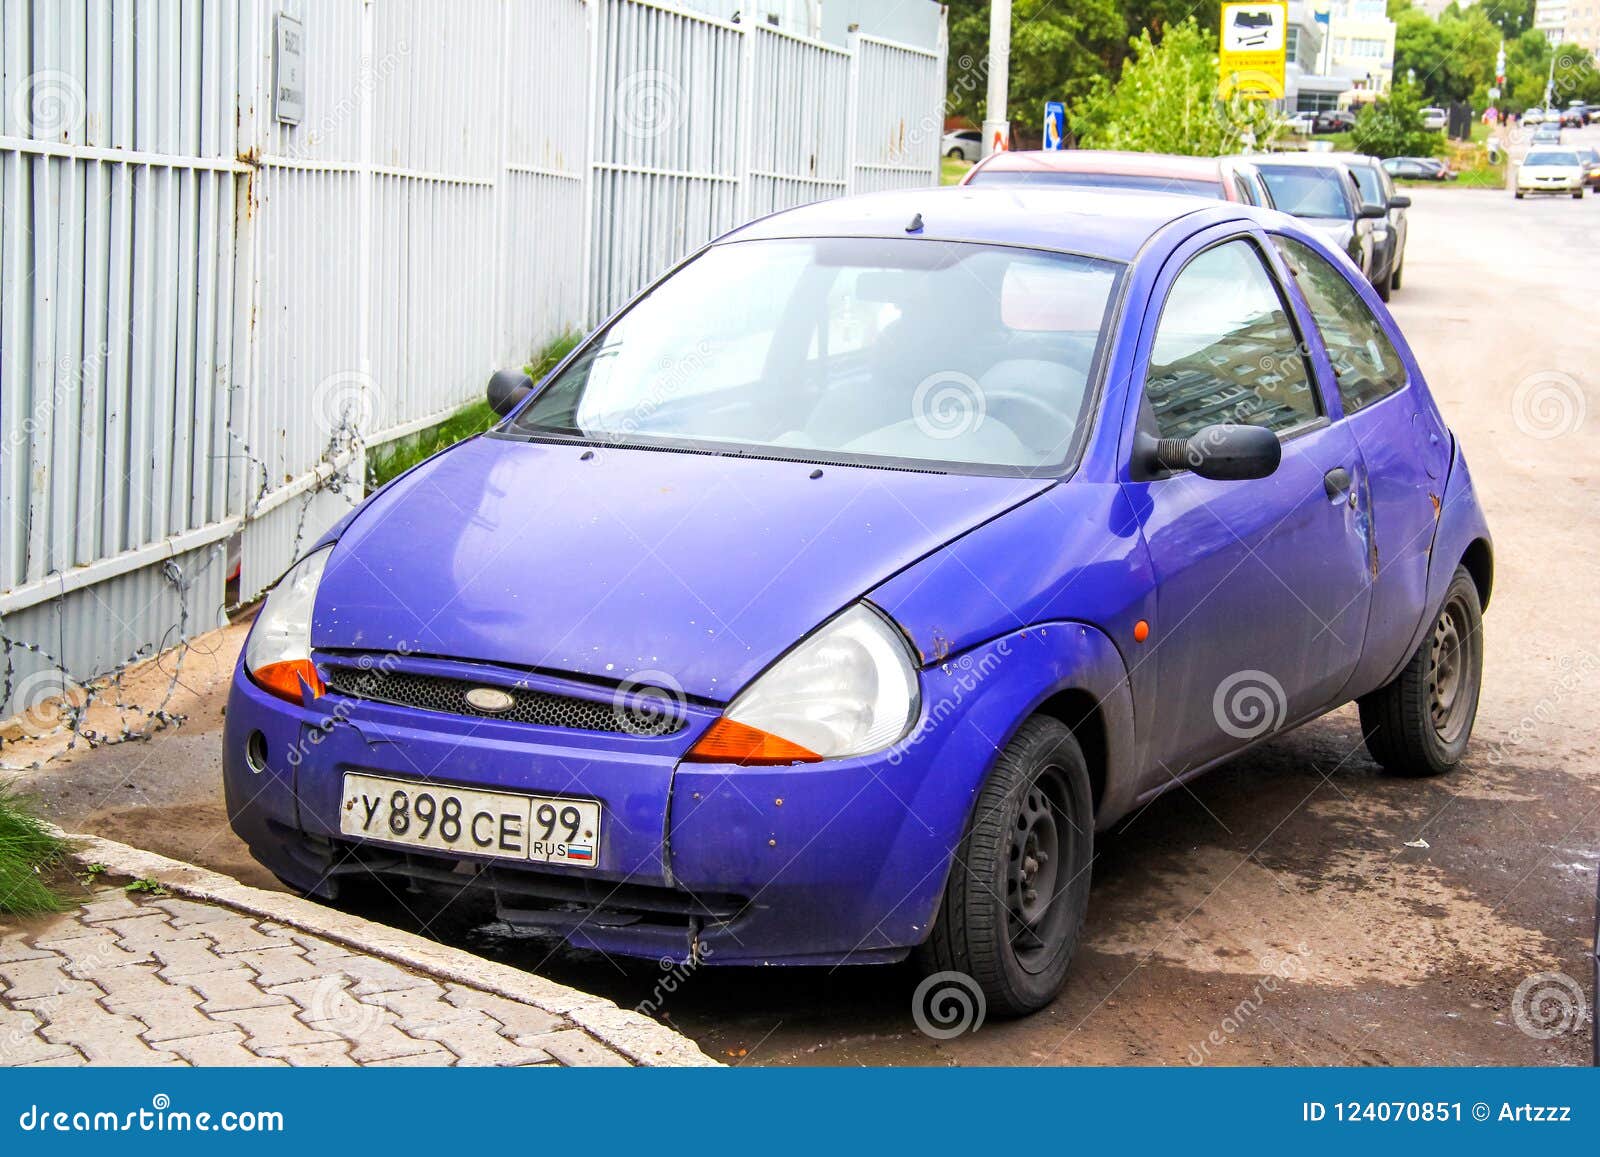 Ford Ka+ grows up: Blue Oval's new city car in pictures